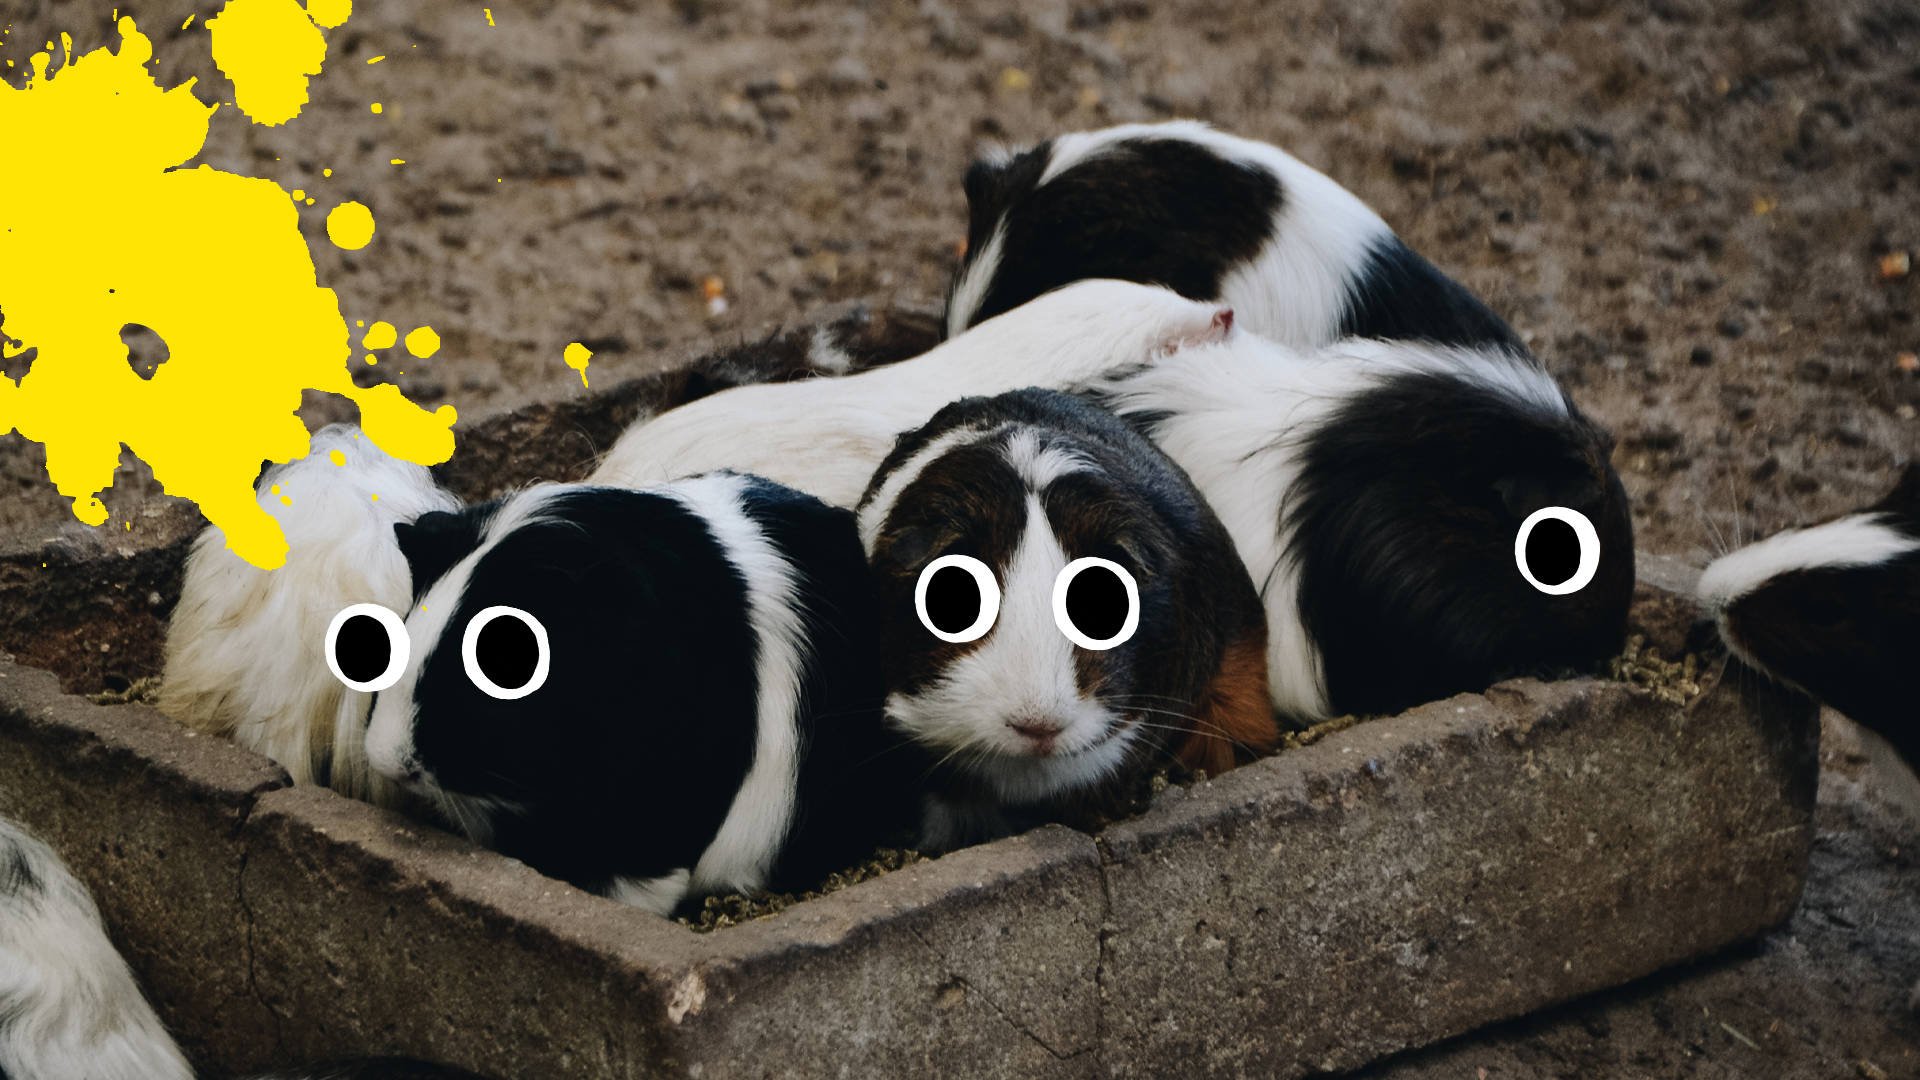 Lots of Guinea pigs and yellow splat